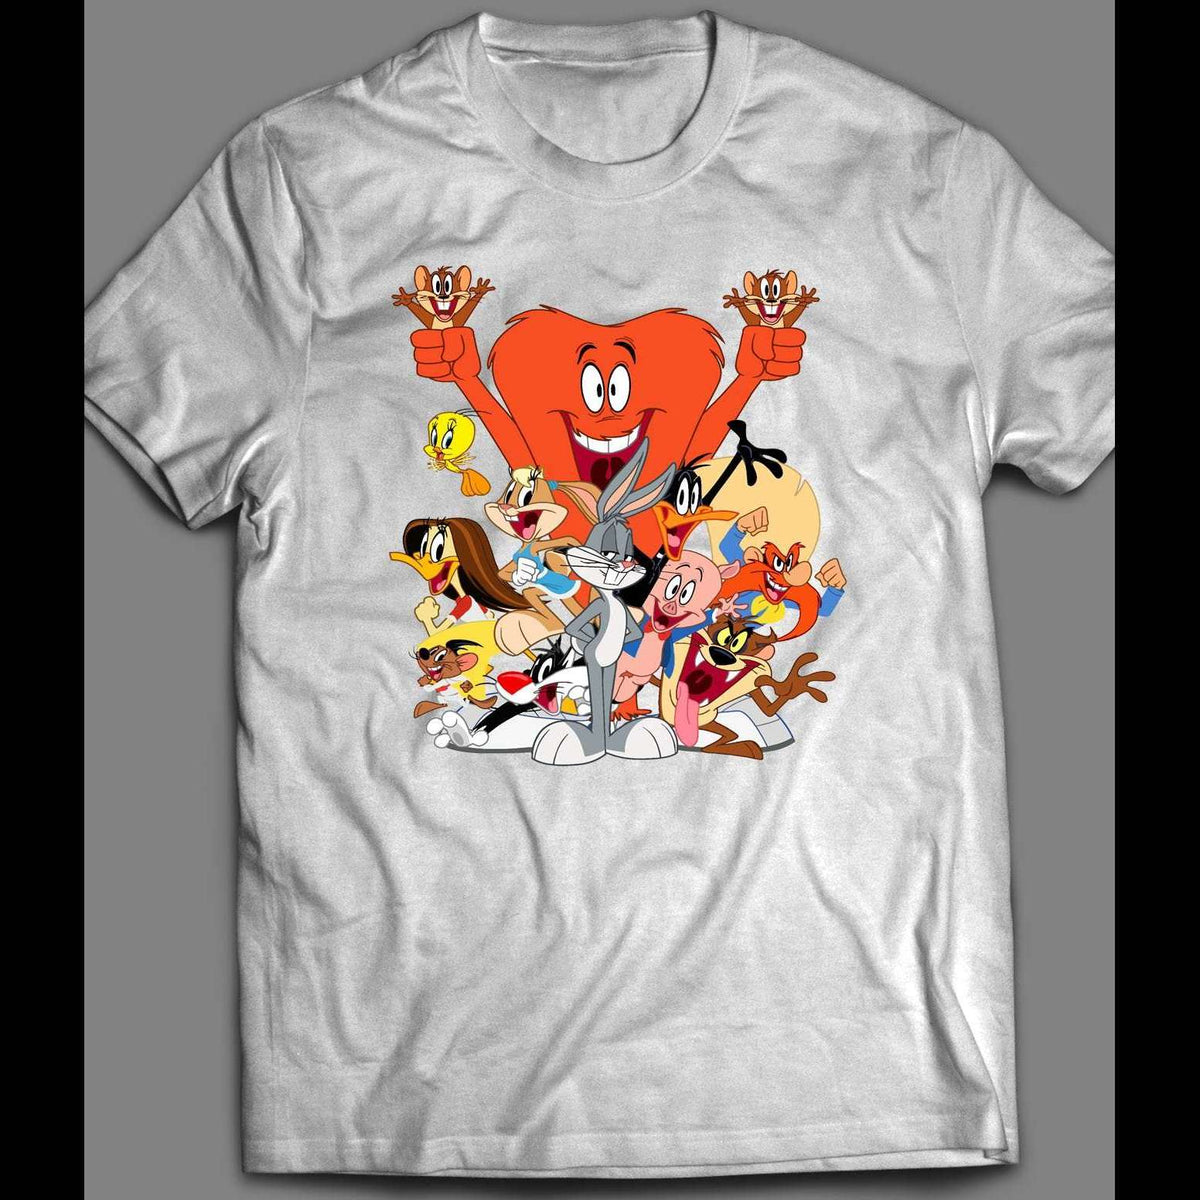 OLDSKOOL LOONEY CARTOON CHARACTERS CUSTOM T-SHIRT | 80's, 90's to Today Quality ...